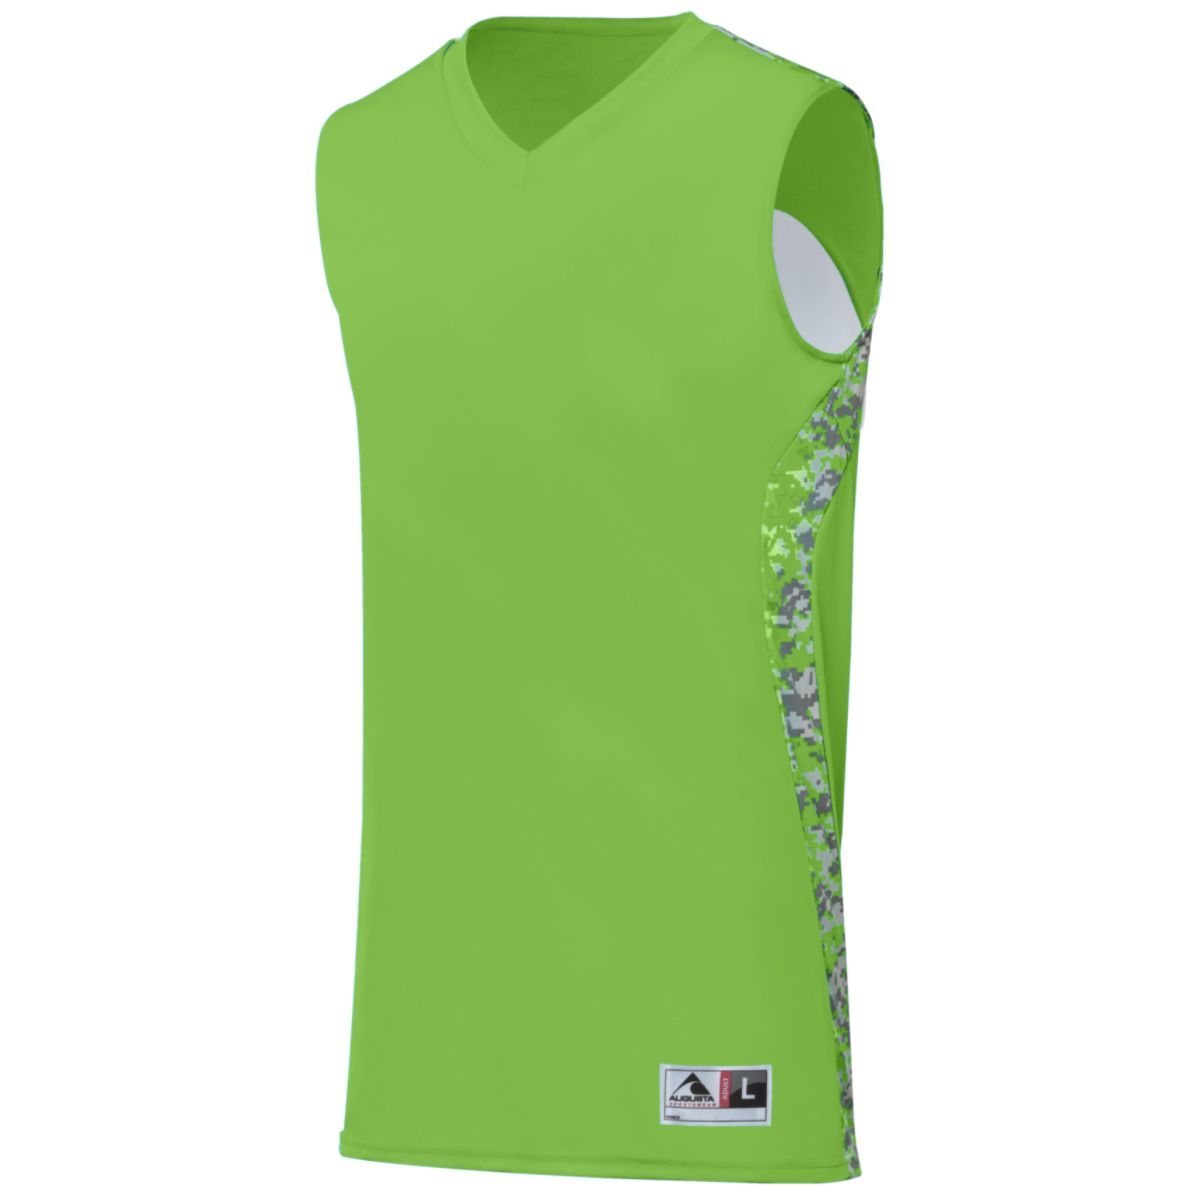 Augusta Sportswear Hook Shot Reversible Jersey in Lime/Lime Digi  -Part of the Adult, Adult-Jersey, Augusta-Products, Basketball, Shirts, All-Sports, All-Sports-1 product lines at KanaleyCreations.com